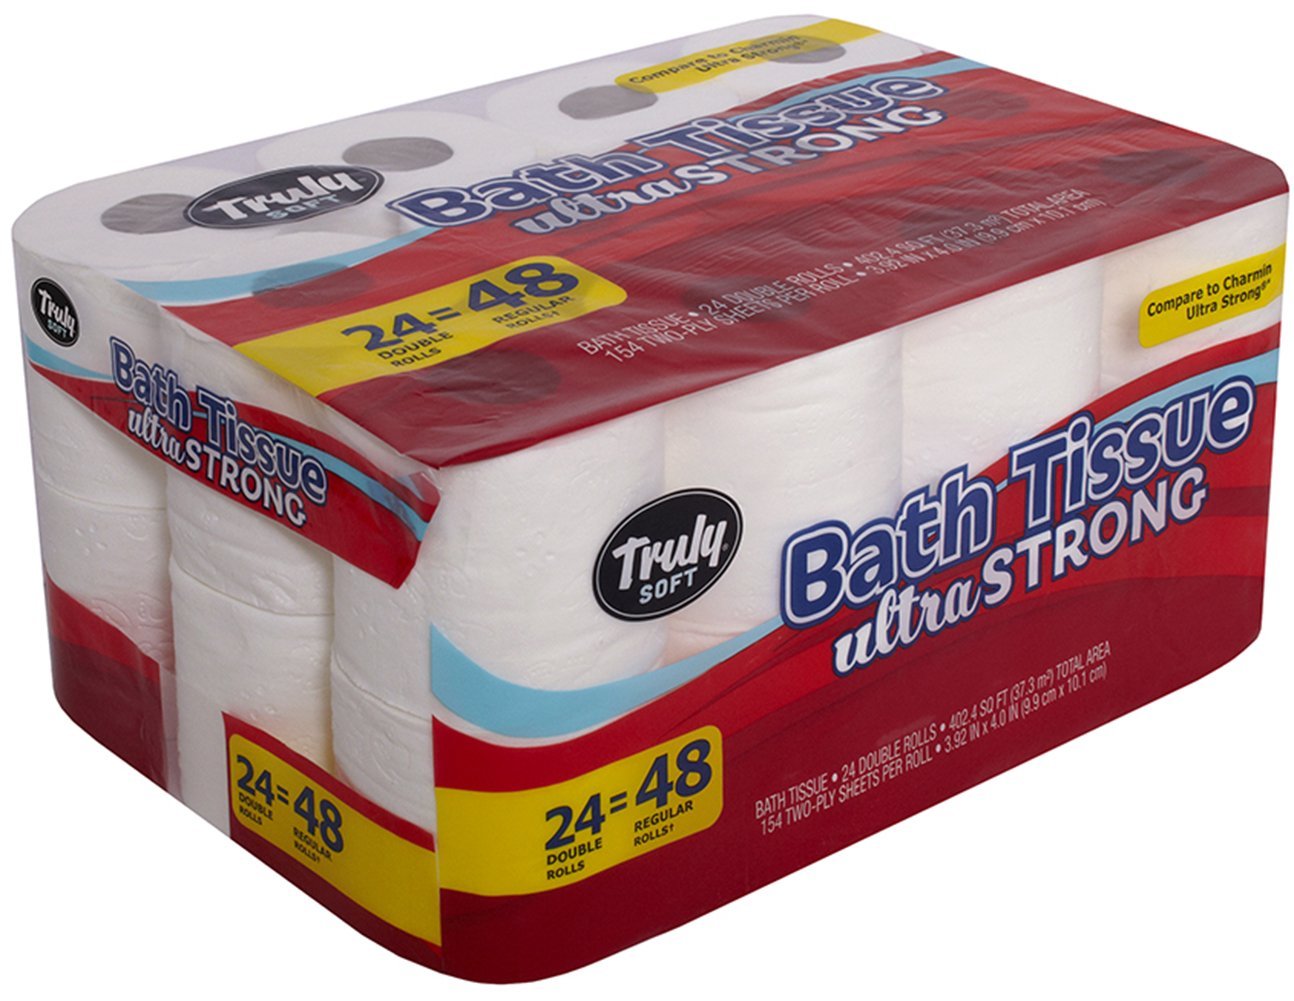 Truly Soft Toilet Paper Ultra Strong Bath Tissue, 24 Double Rolls = 48 Regular Rolls, White